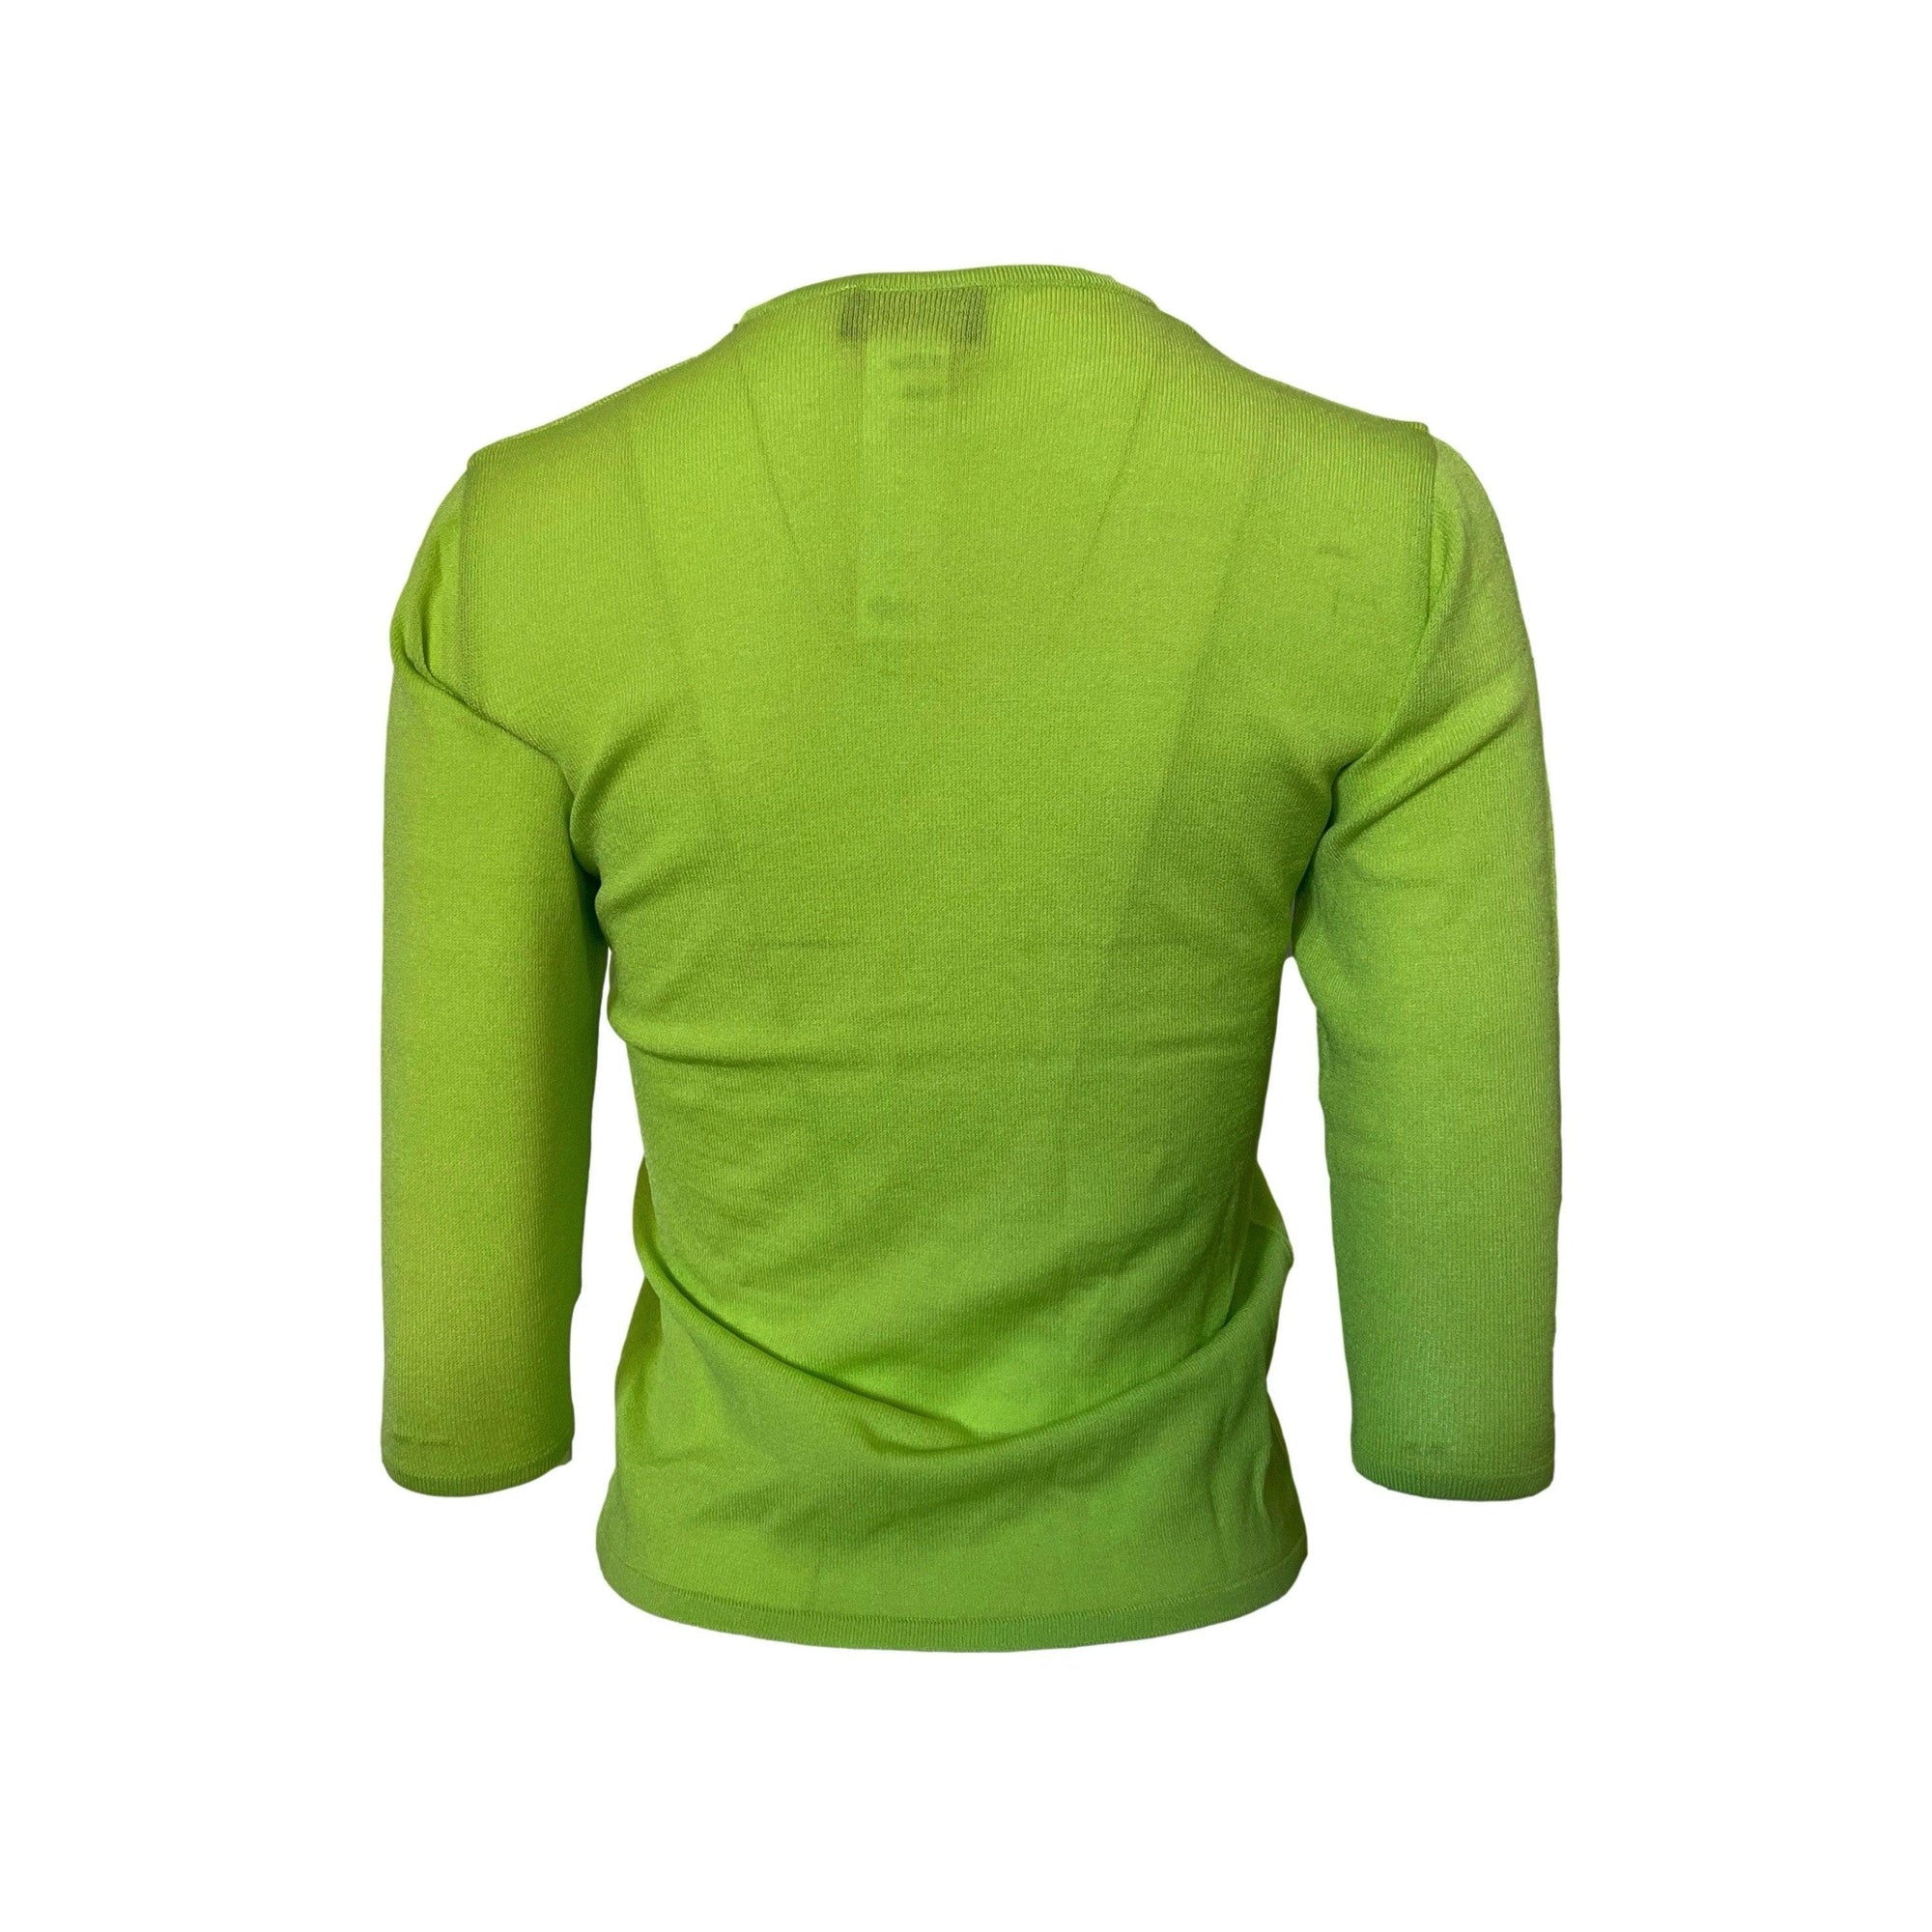 Versace Lime Green Butterfly Top - Apparel